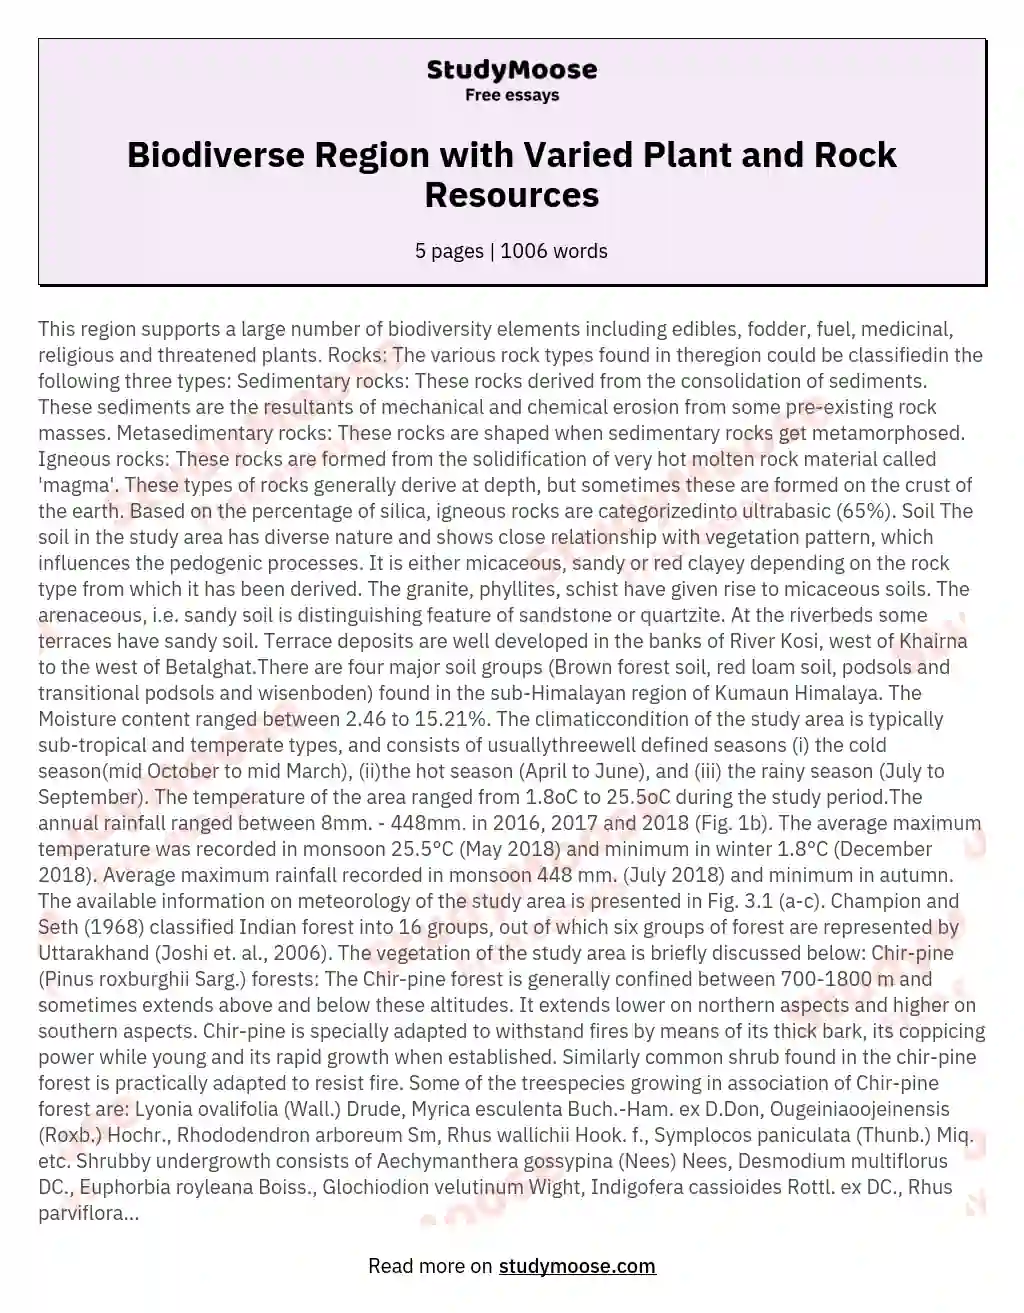 Biodiverse Region with Varied Plant and Rock Resources essay